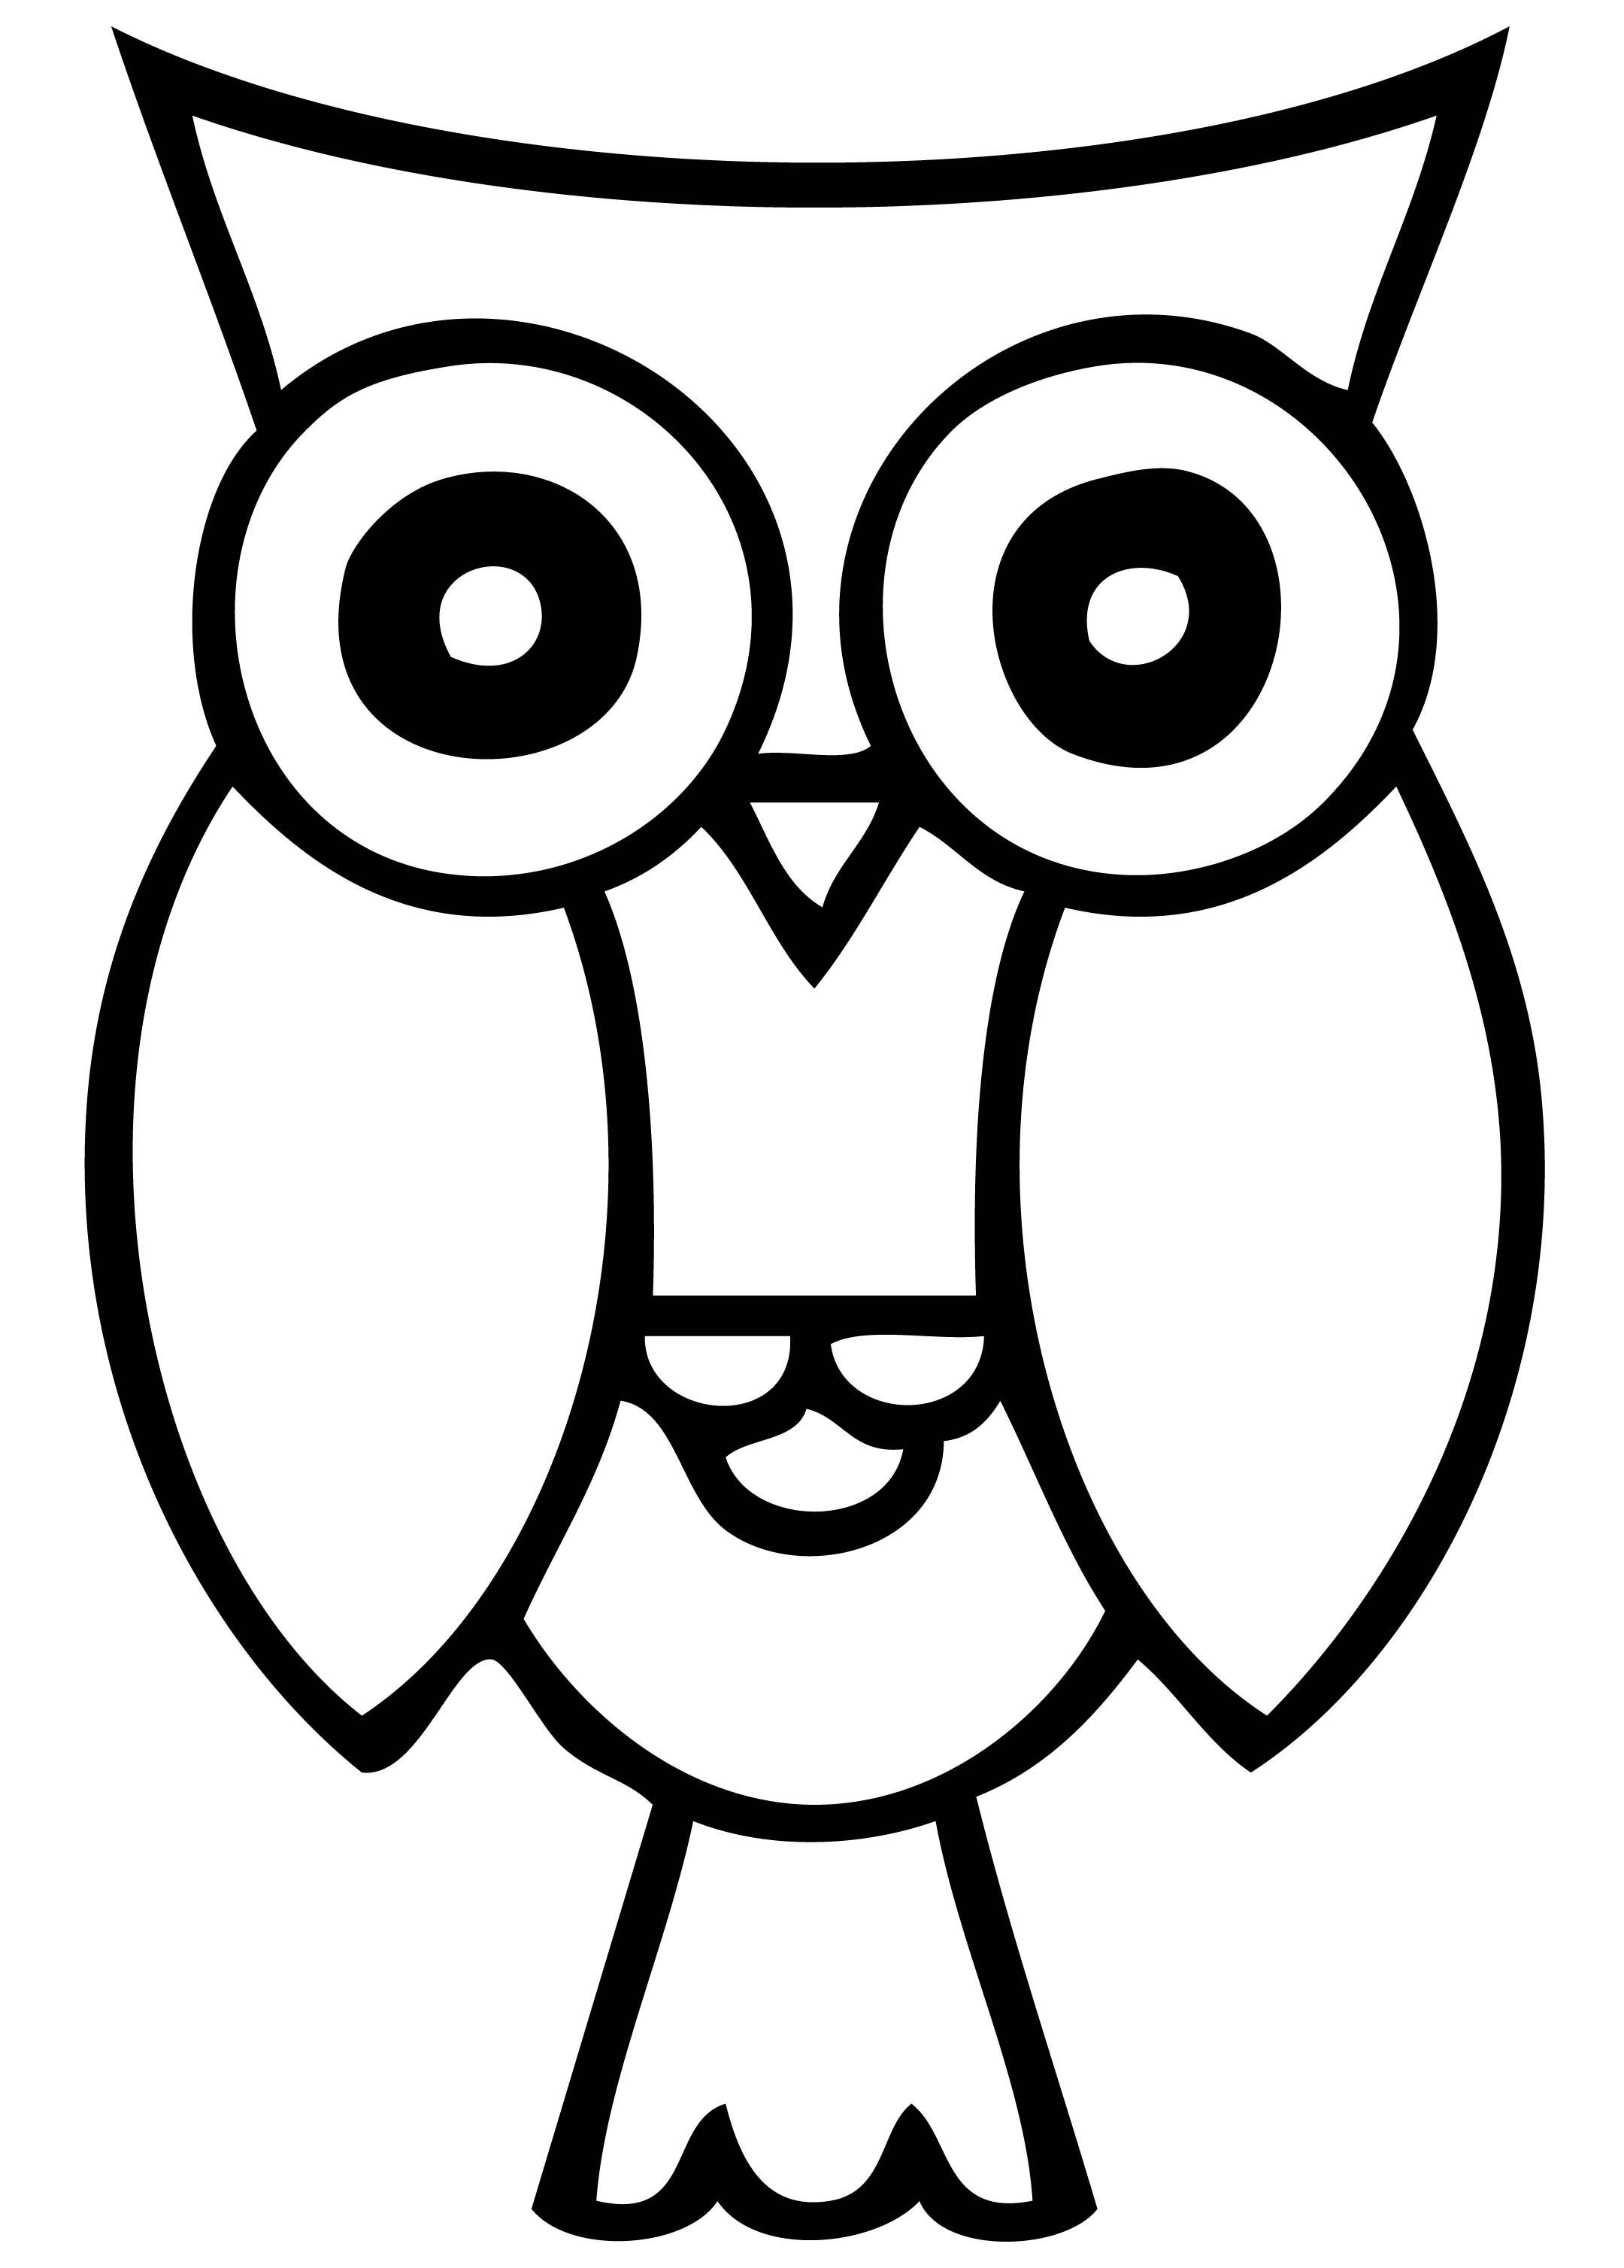 Image of Owl Clipart Black and White #10821, Free Clipart Owls ...